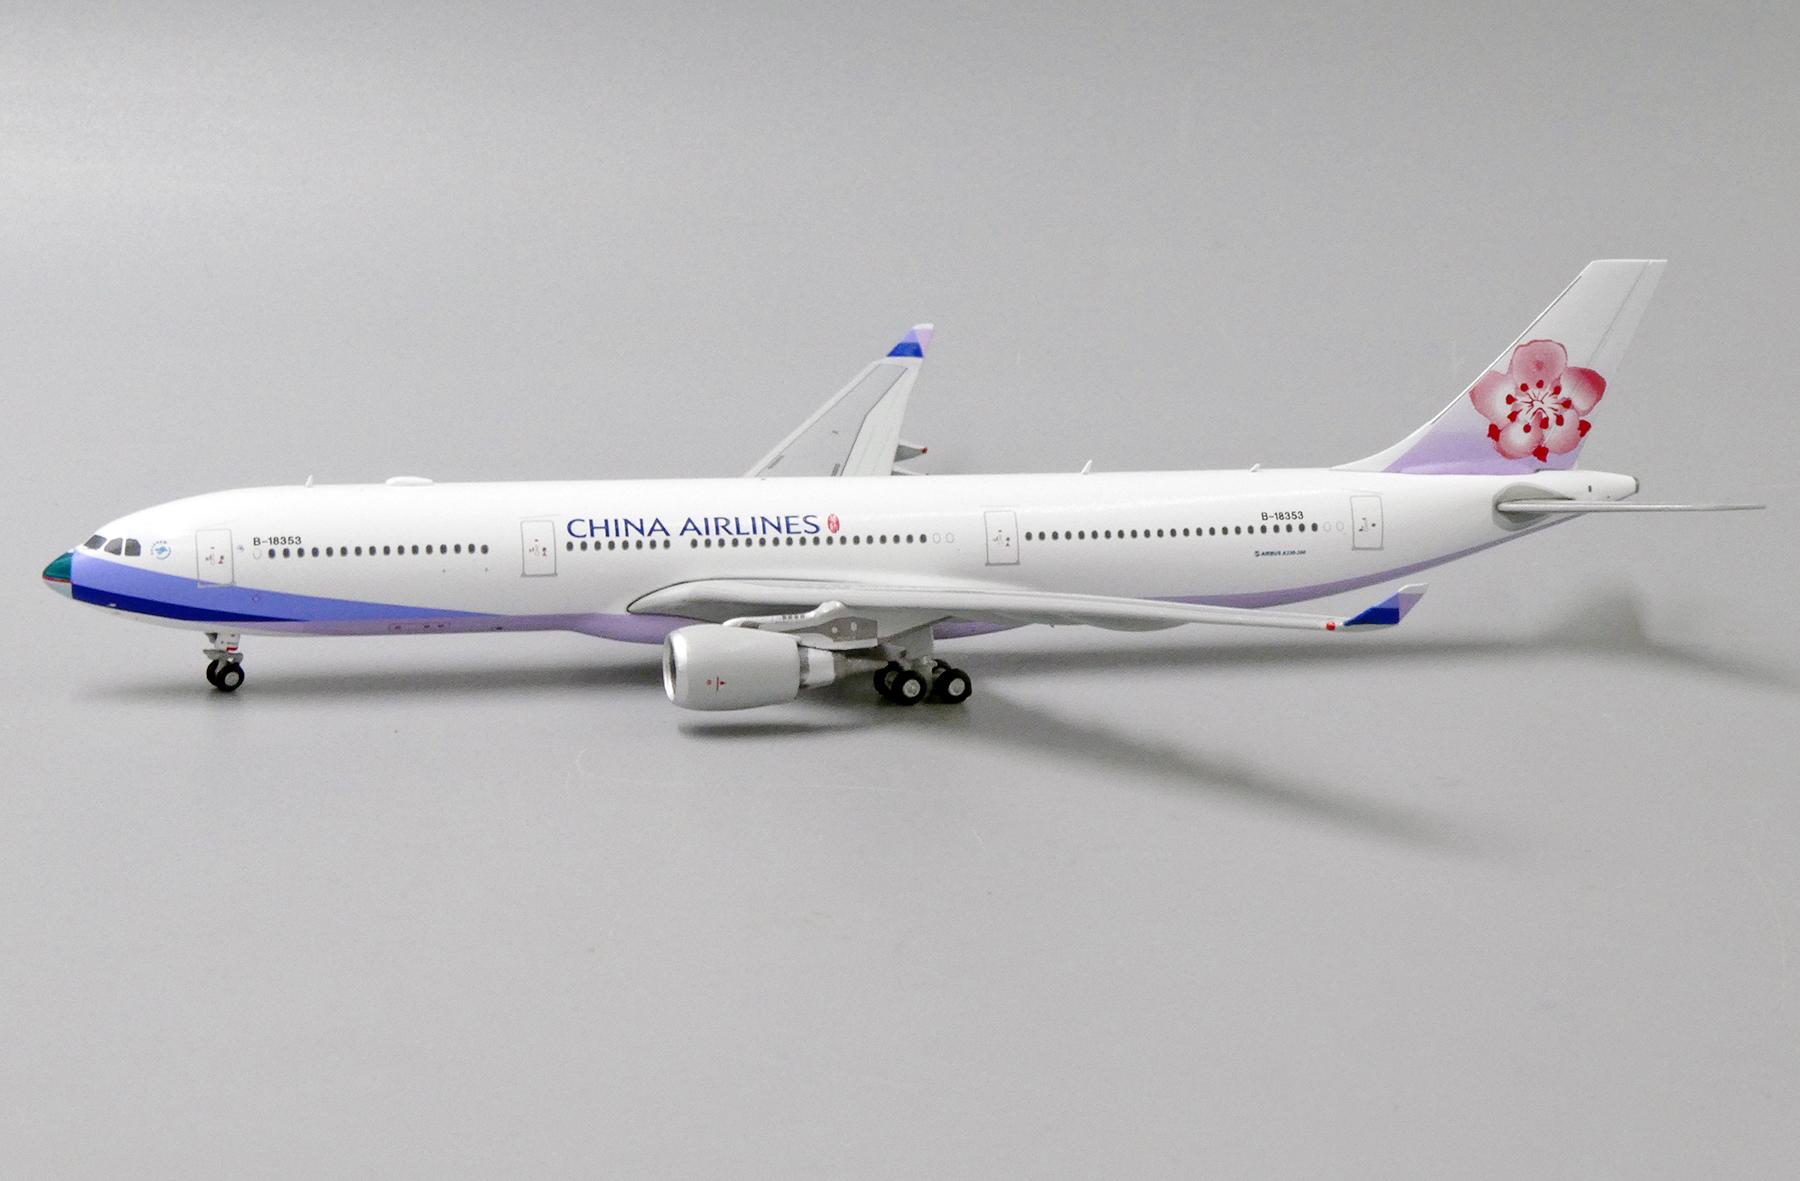 B-18317 JC Wings Scale 1:400 Diecast model * SALE *China Airlines A330-300 Reg 